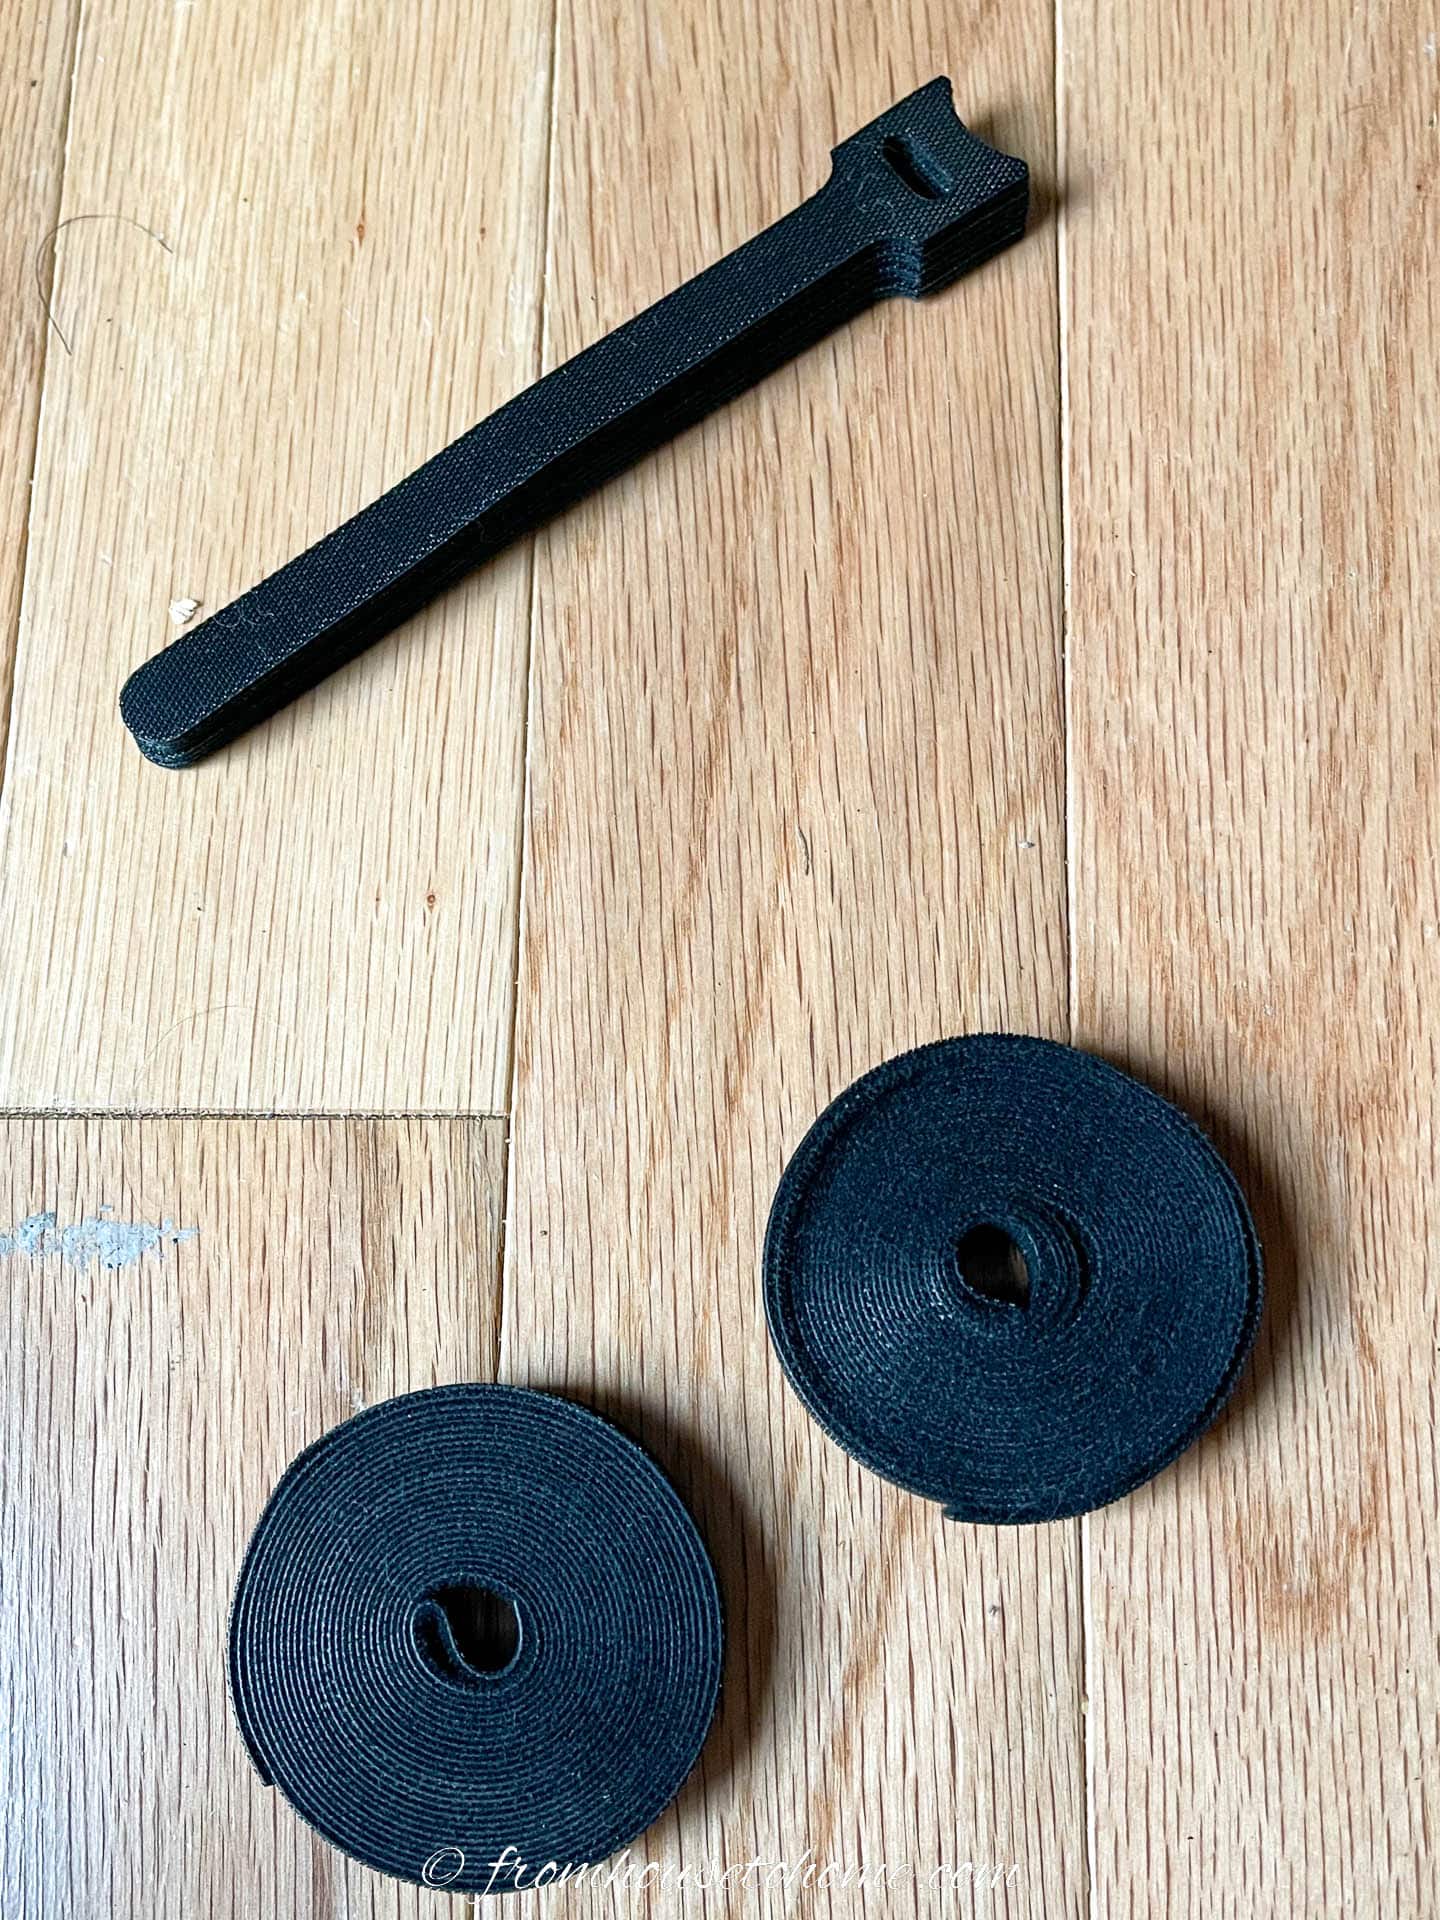 Two types of velcro ties on a wood background